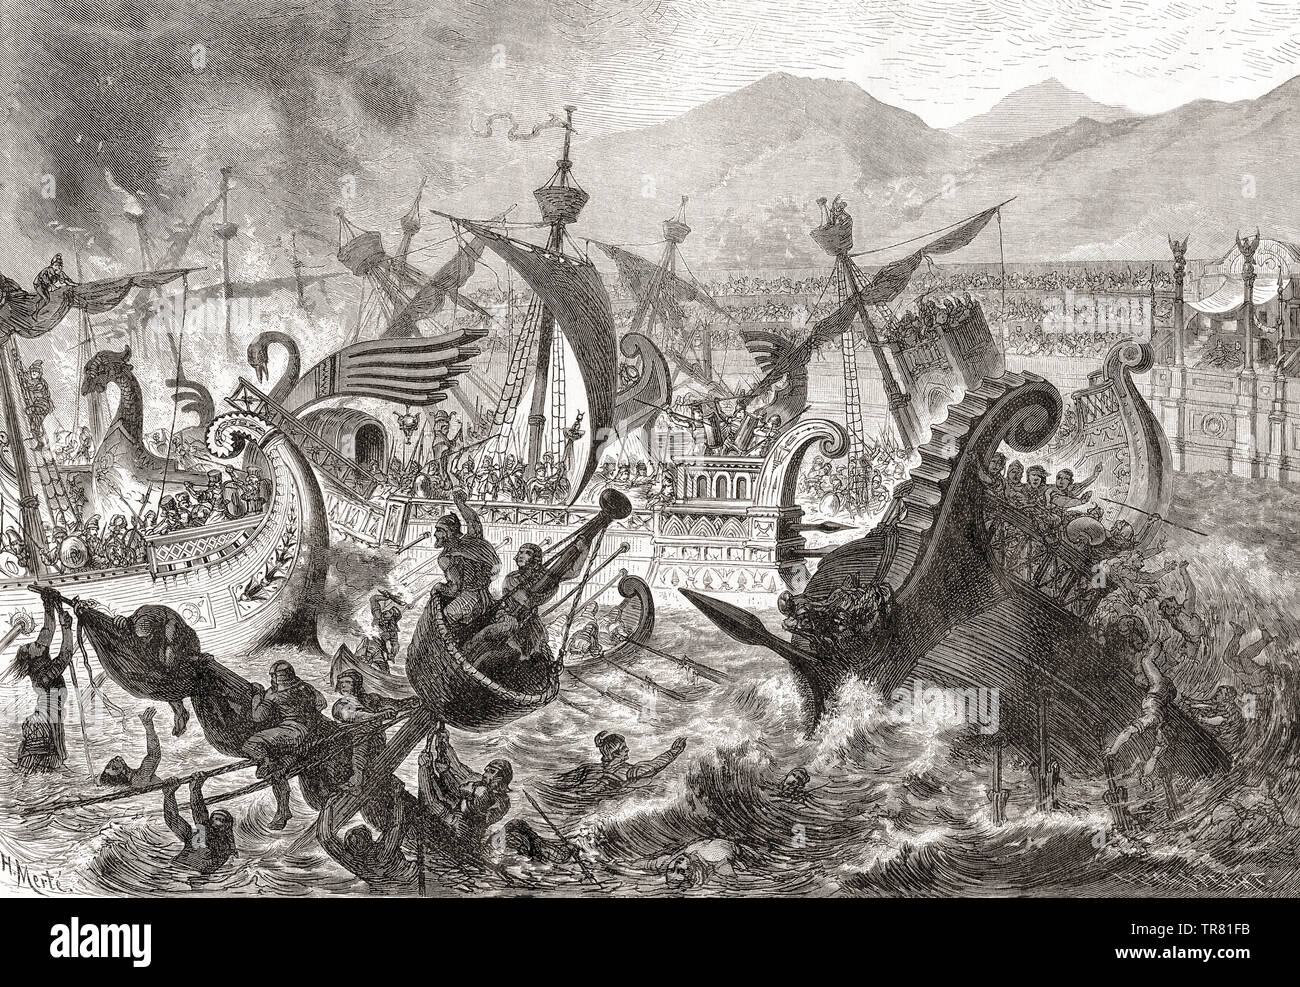 Naval combat in the coliseum in ancient Rome. The first naval battle or Naumachia, was held in the Coliseum in 80AD during its opening ceremony. The circus was flooded and flat bottomed ships, manned by convicts and designed especially for the shallow water staged the battle.  From La Ilustracion Iberica, published 1884. Stock Photo